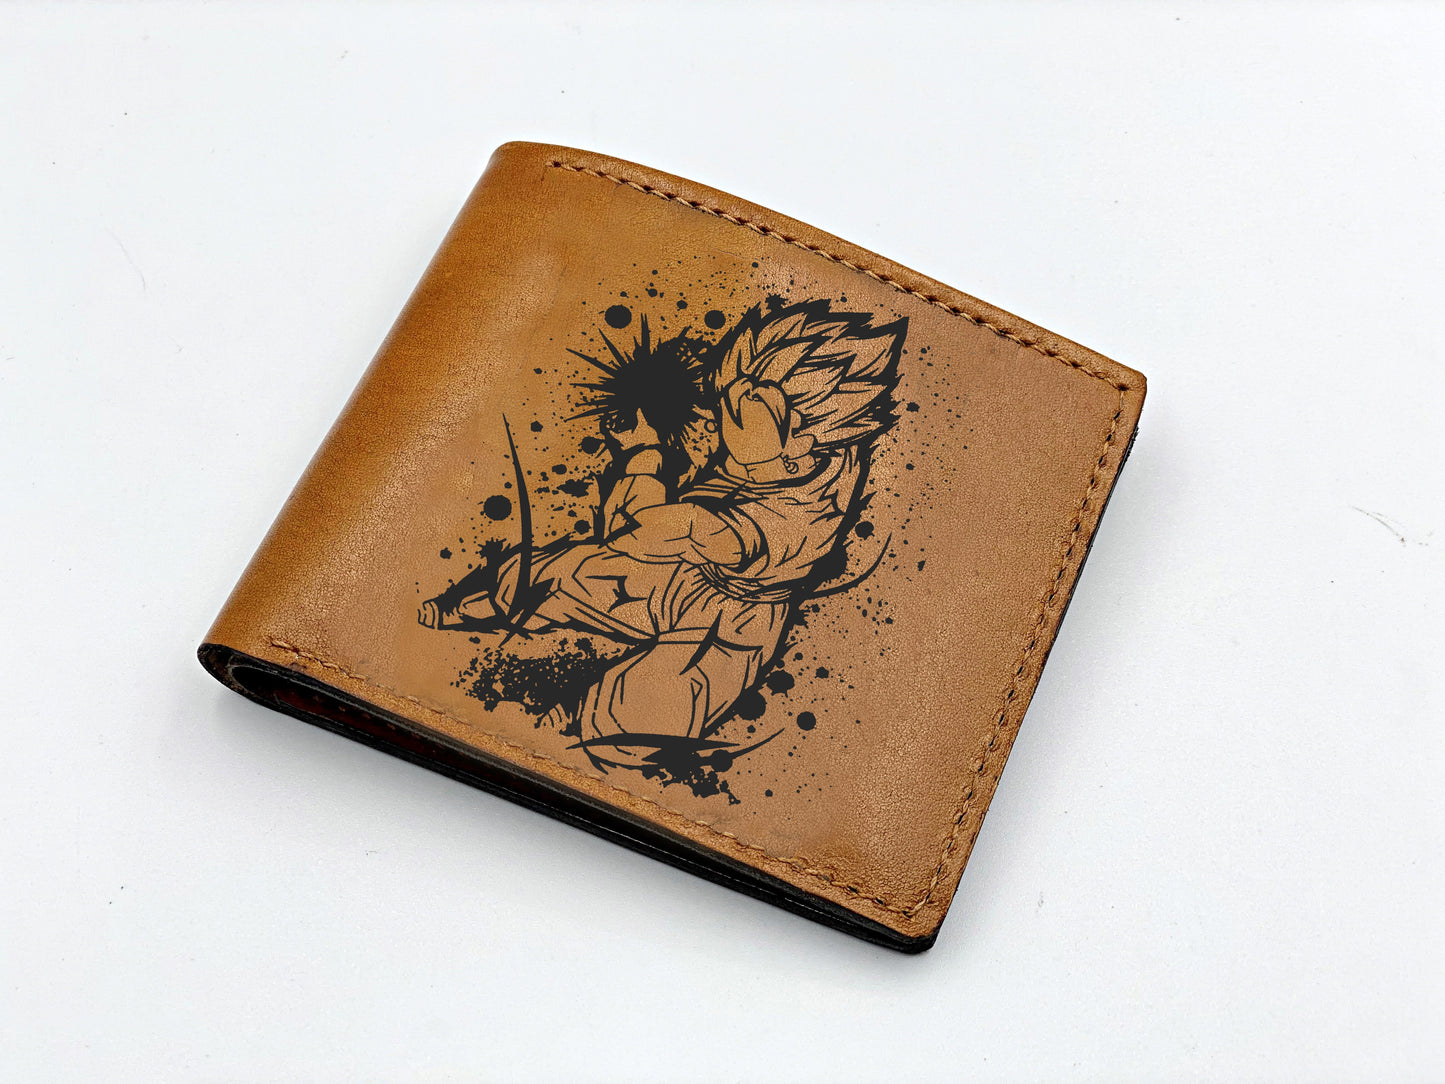 Mayan Corner - Son Goku Super Saiyan art wallet, anime characters leather gifts, leather anniversary present for him, dragon ball fan collection